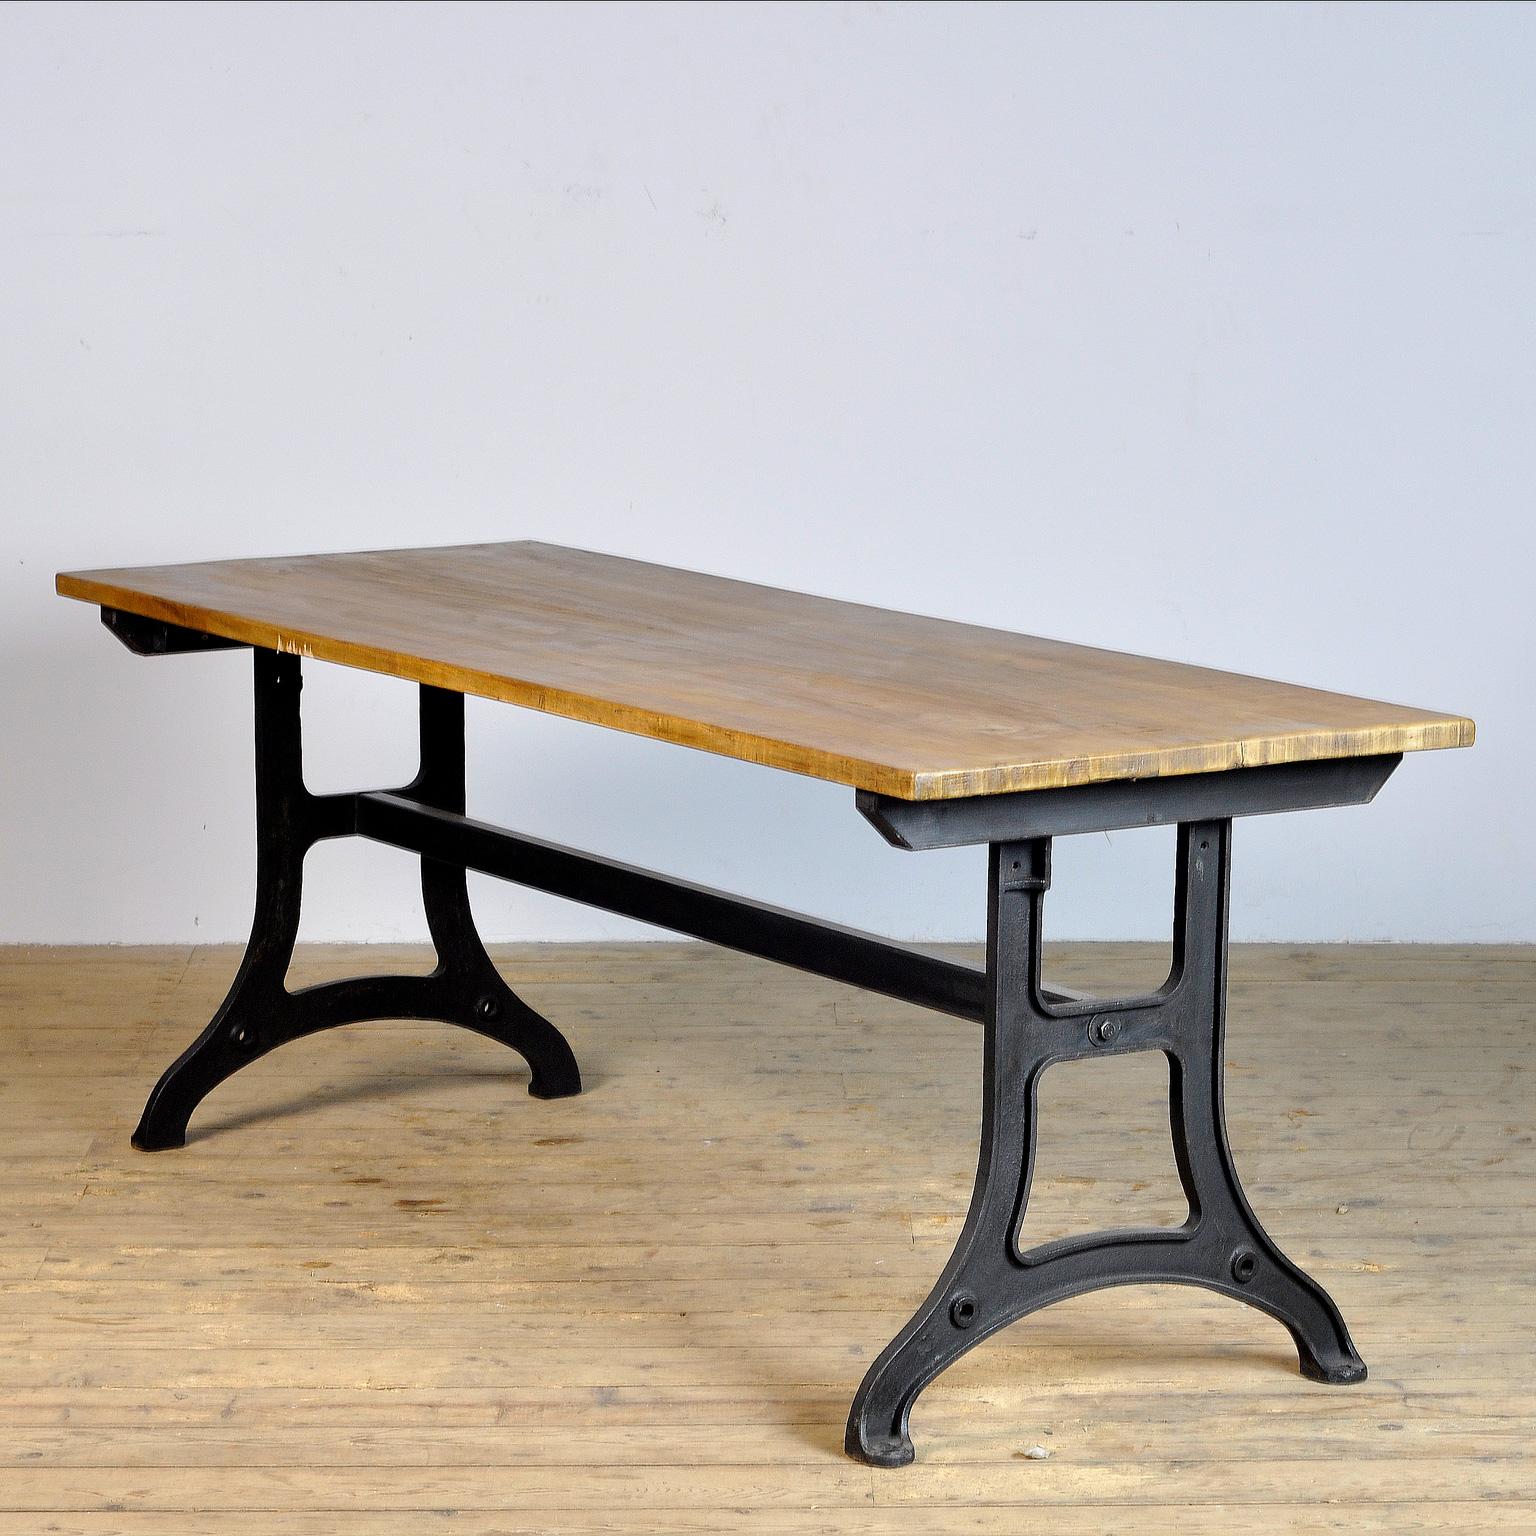 French Industrial Table with a Cast Iron Base